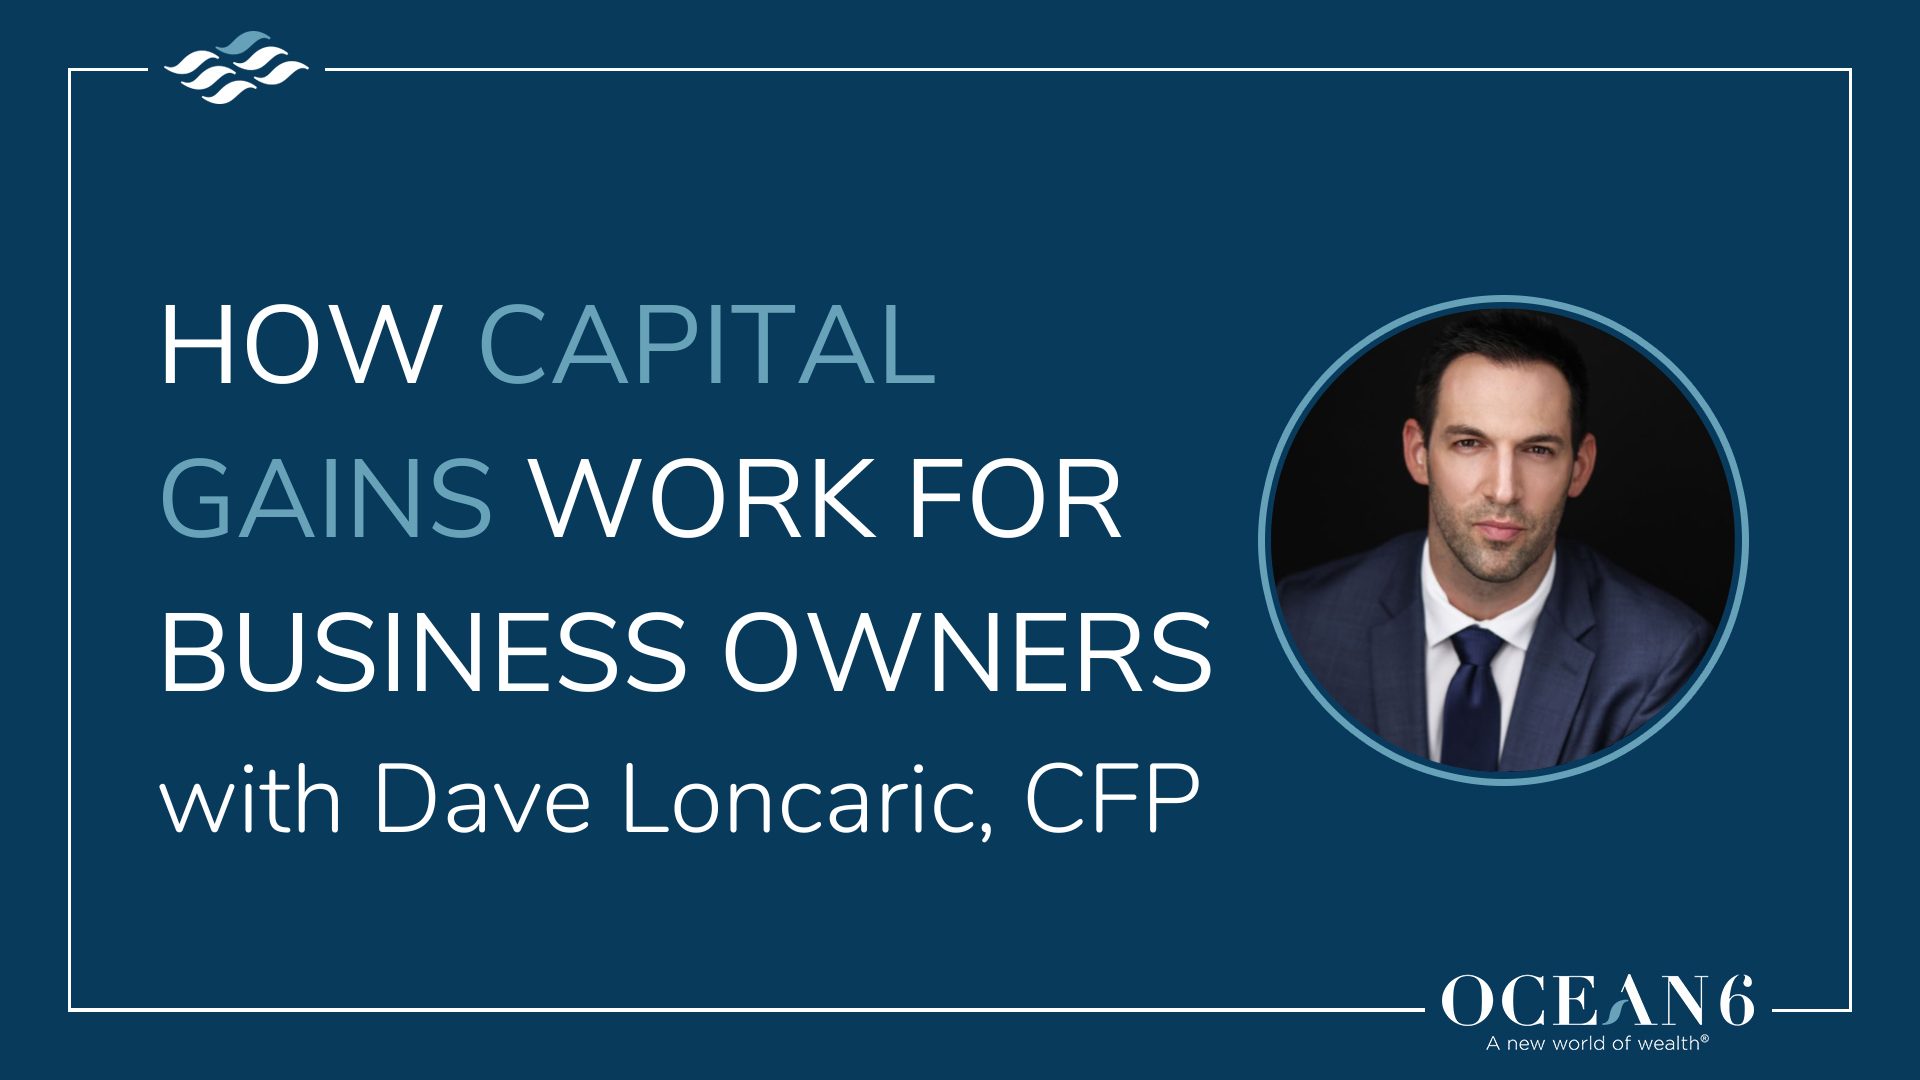 Blog thumbnail with financial advisor head shot - how capital gains work for business owners